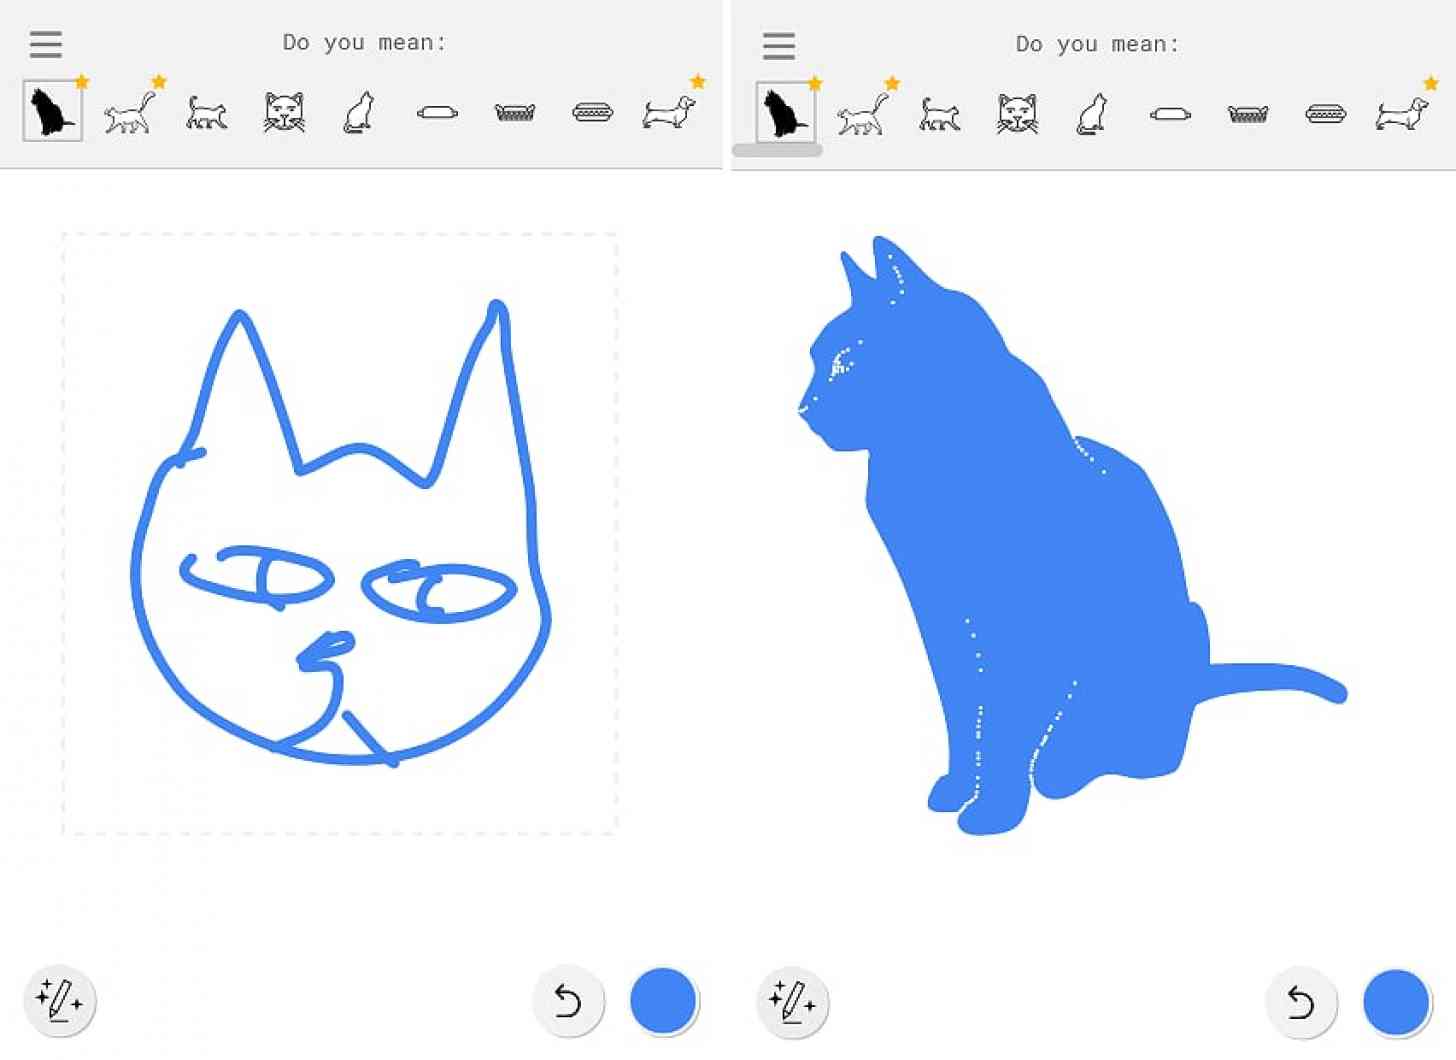 AutoDraw: Turn Your Bad Drawing To Be Pretty Amazing